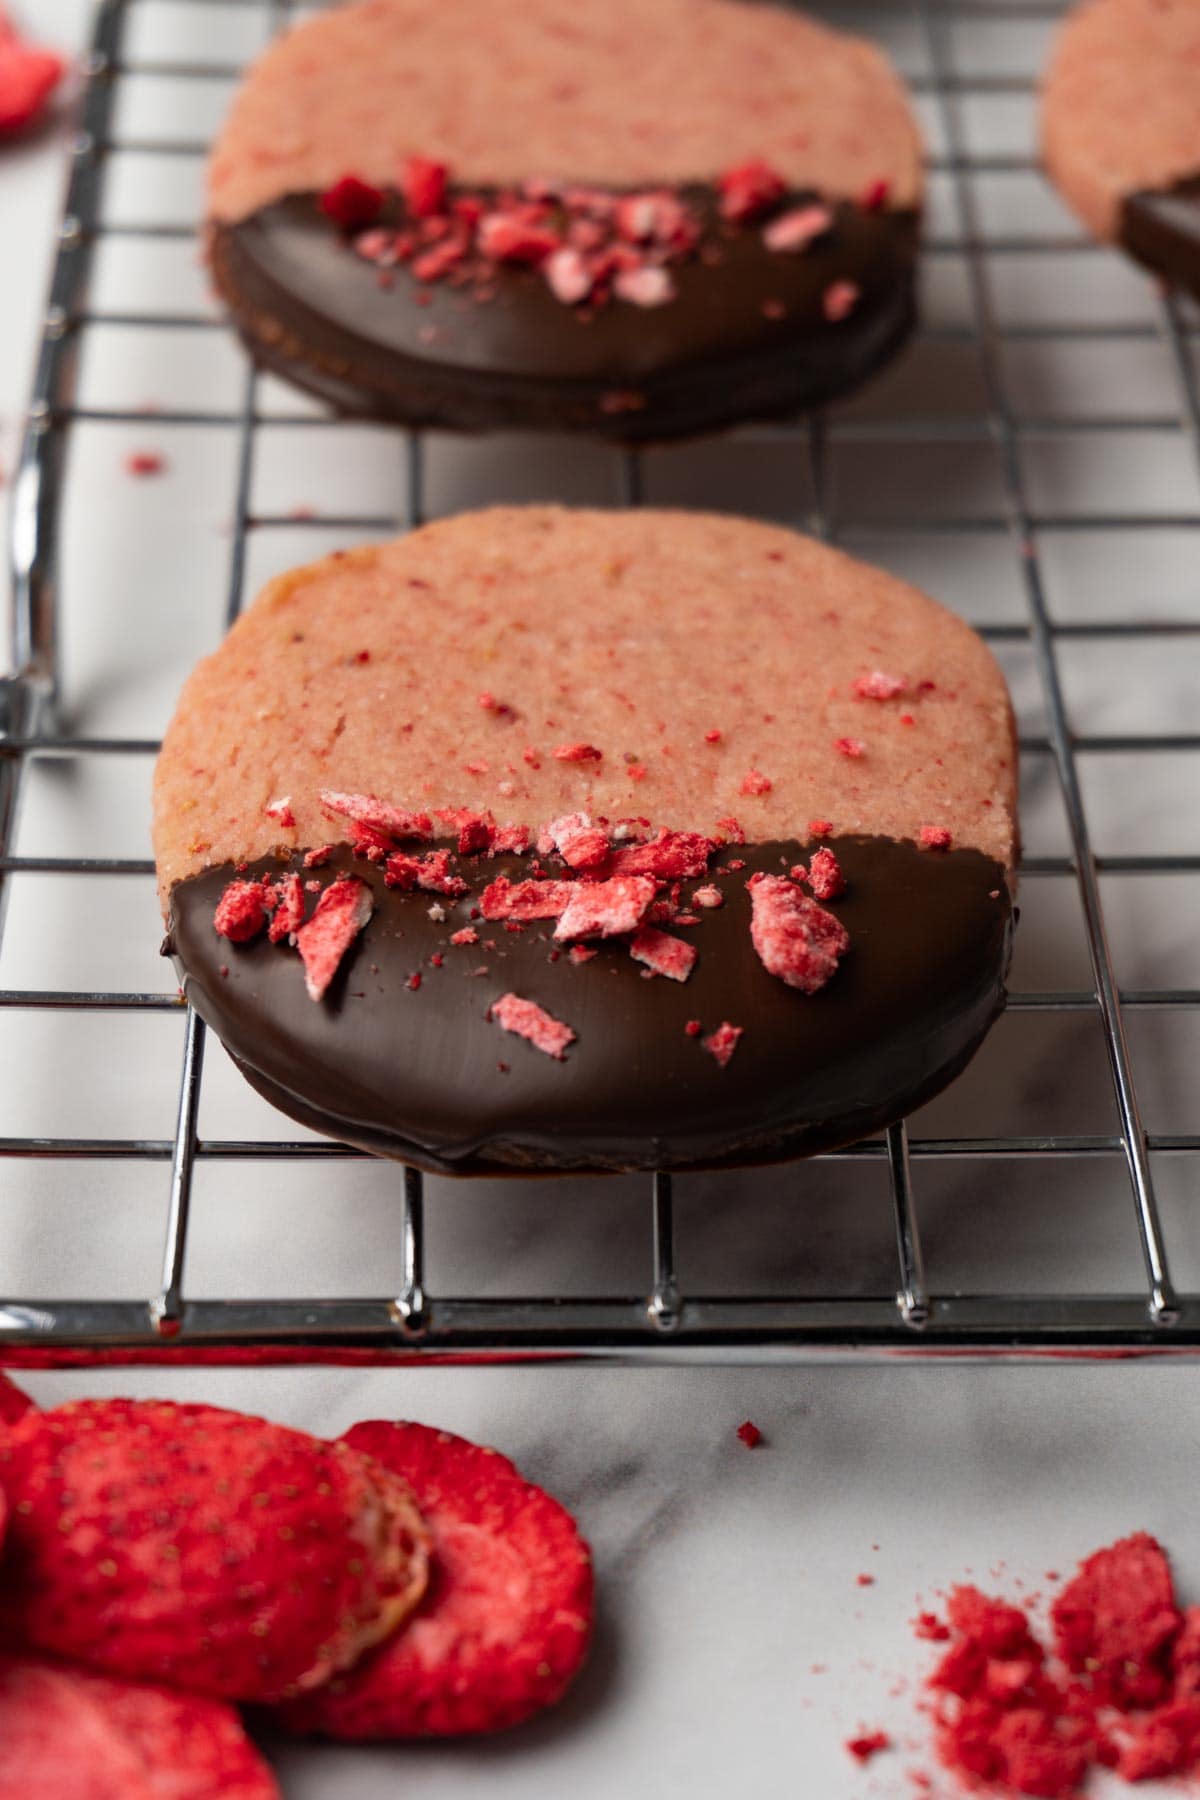 Halfway covered with dark chocolate strawberry shortbread cookies decorated with crushed freeze-dried strawberries are lying on a wire rack.